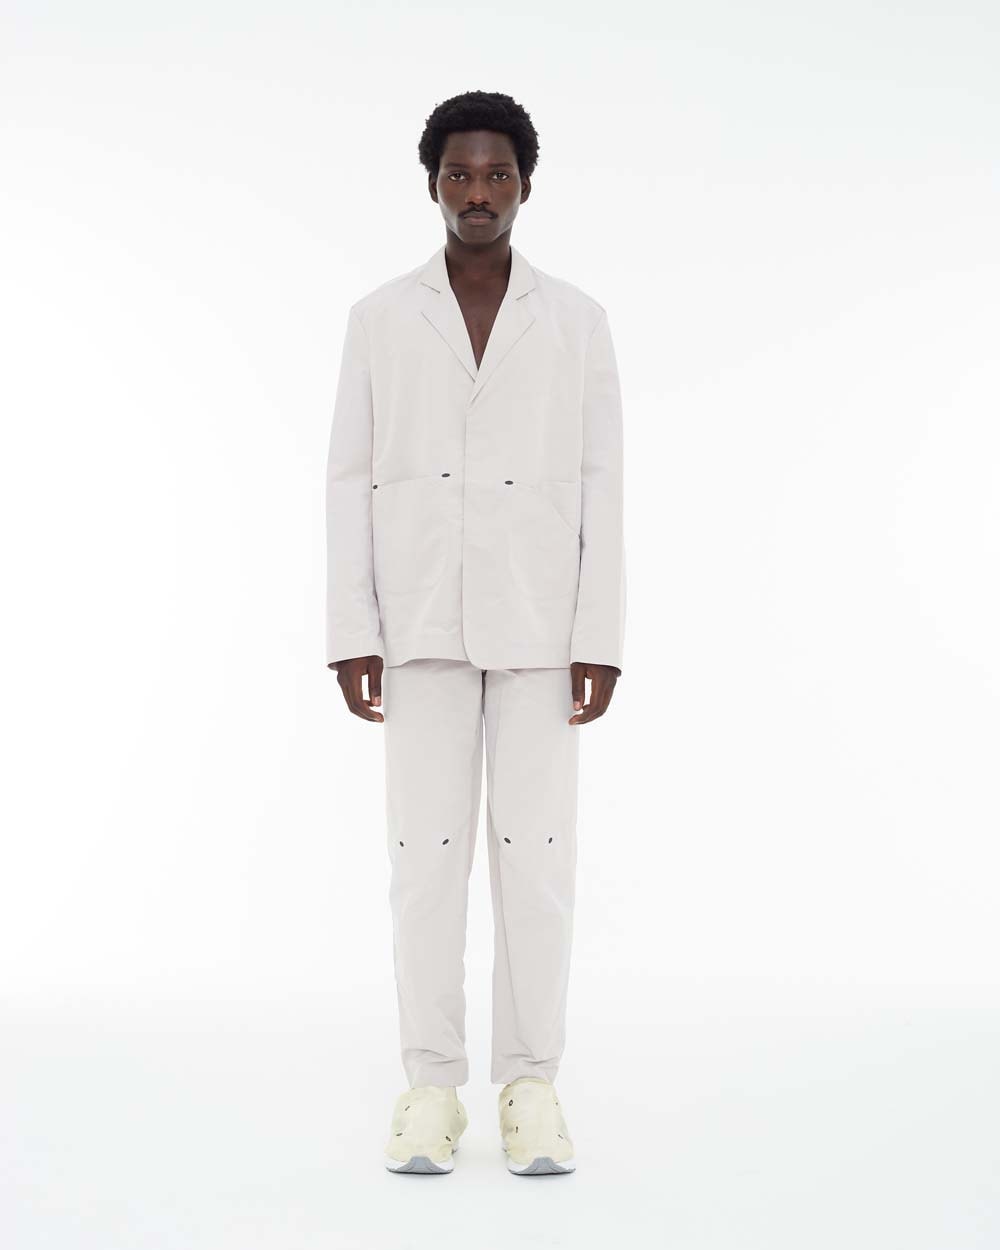 P.Andrade Debut Menswear Collection by Pedro Andrade | Hypebeast